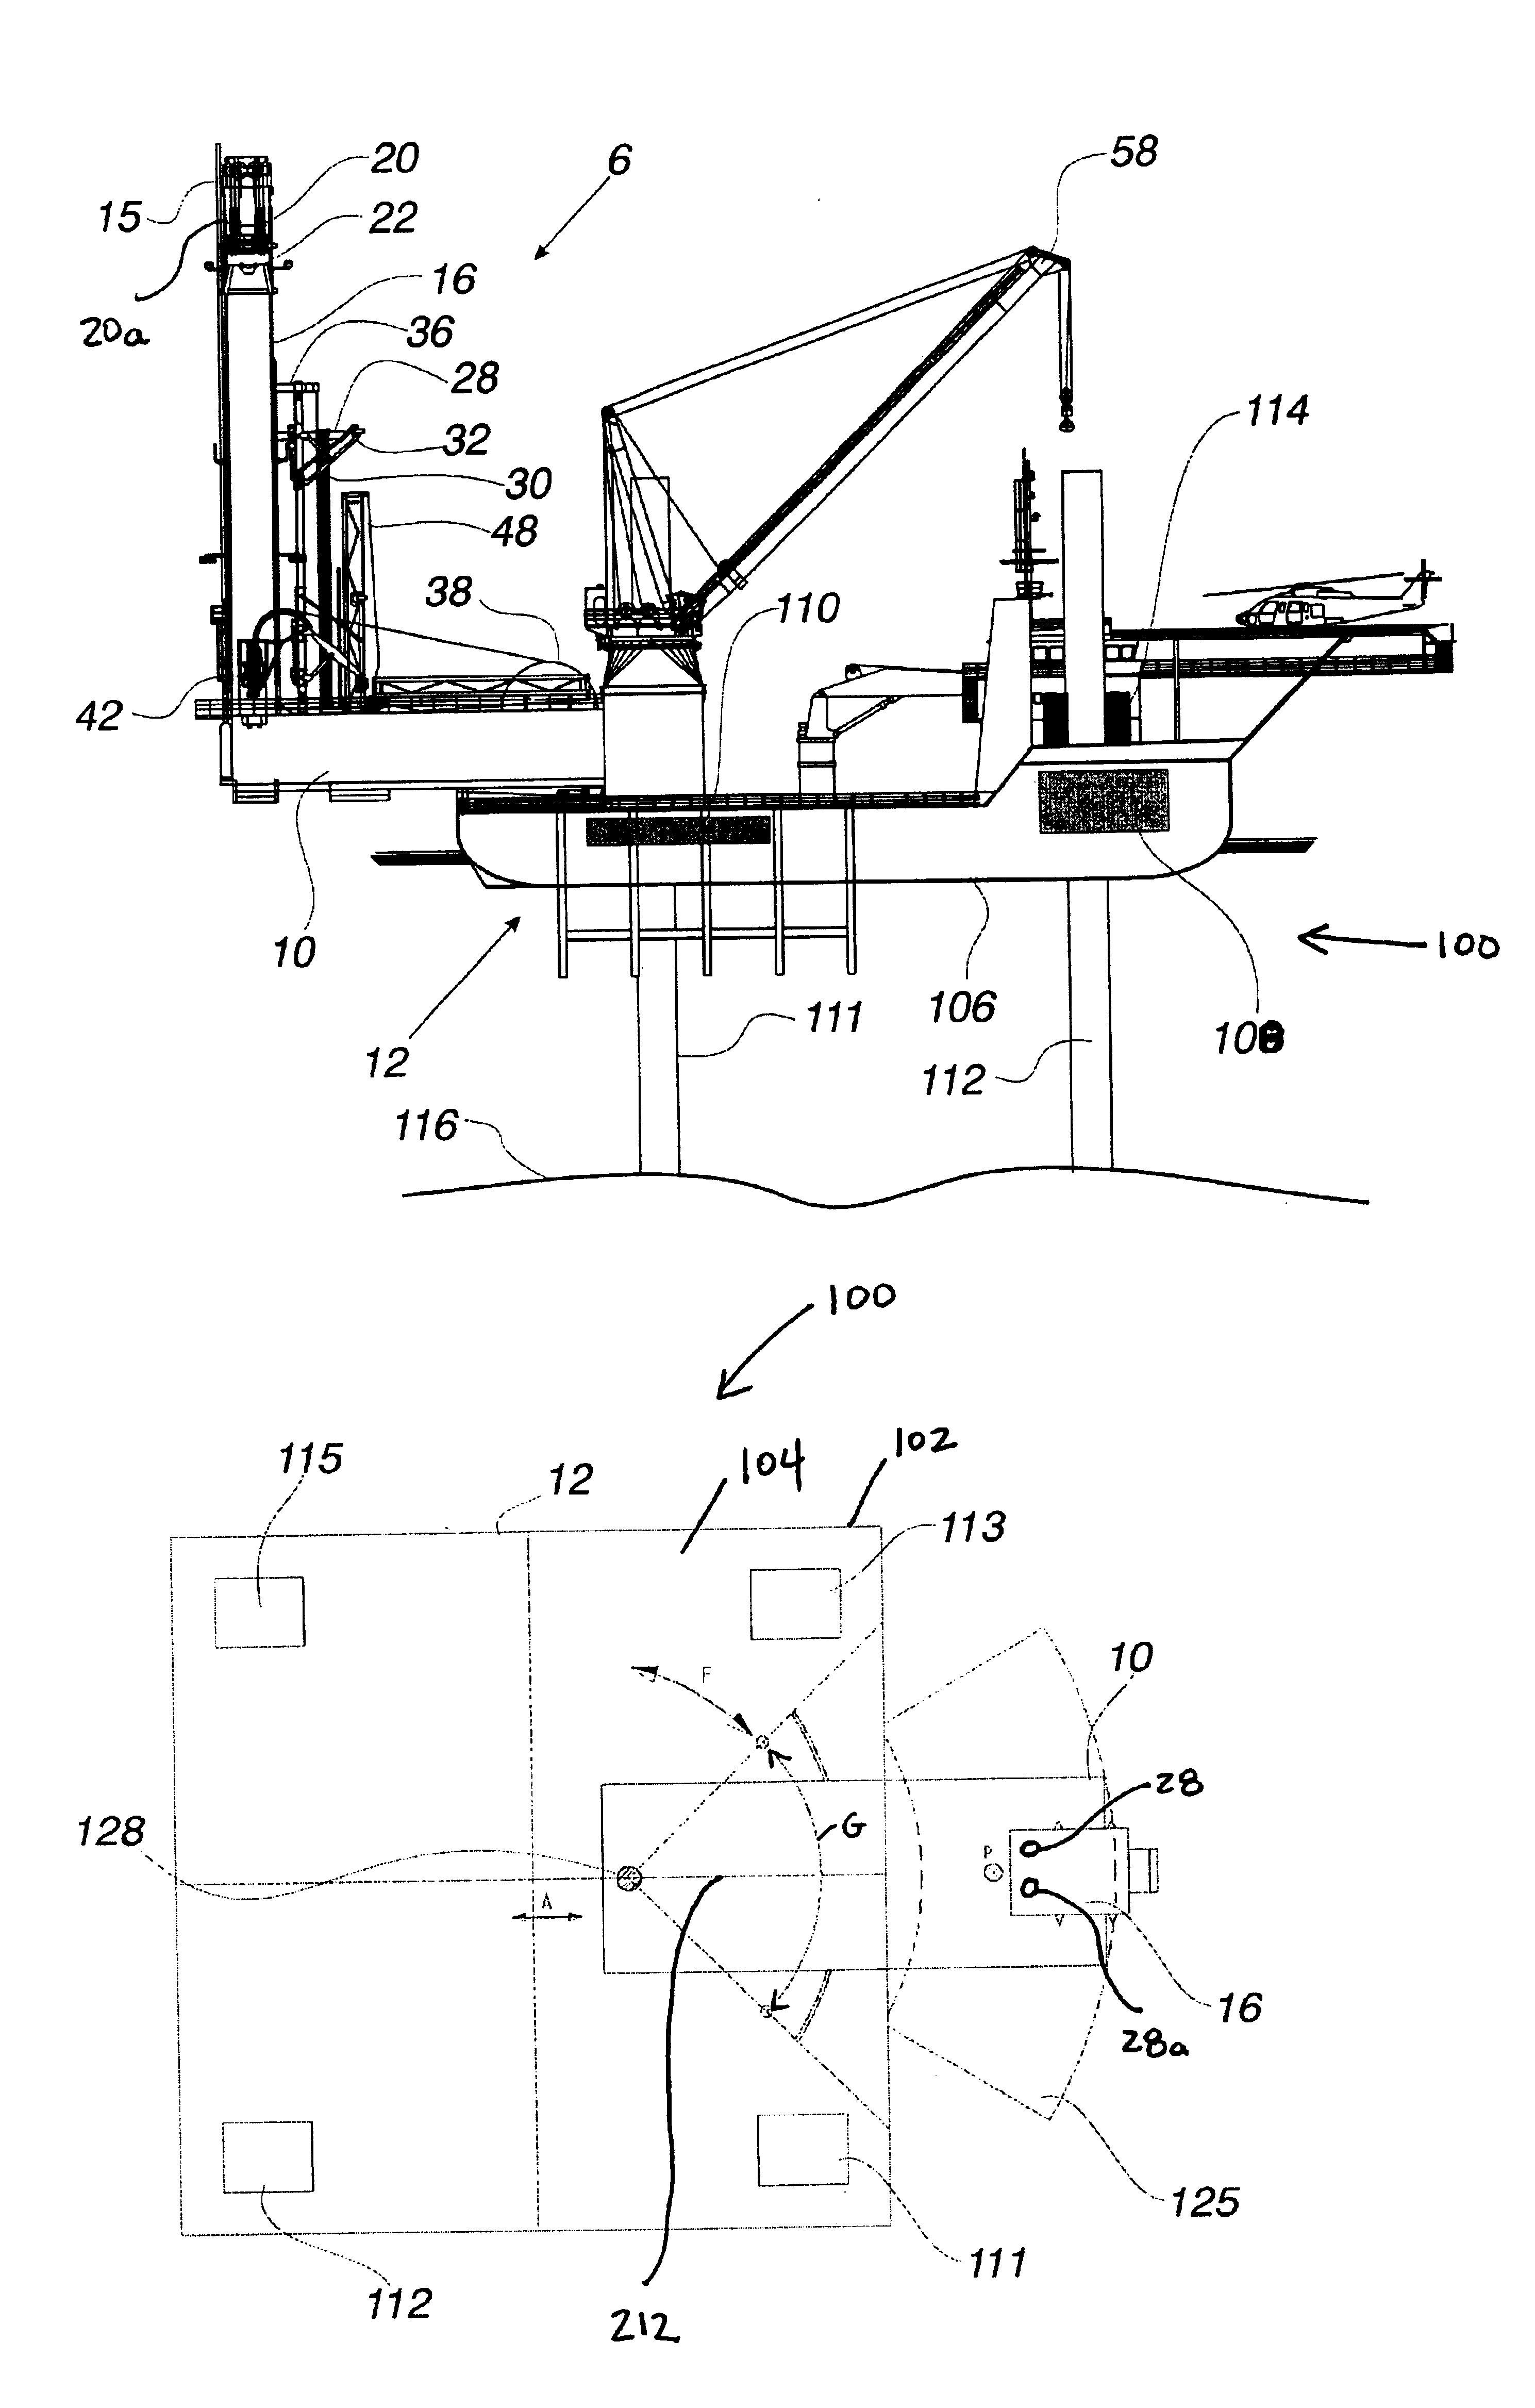 Method for using a multipurpose system